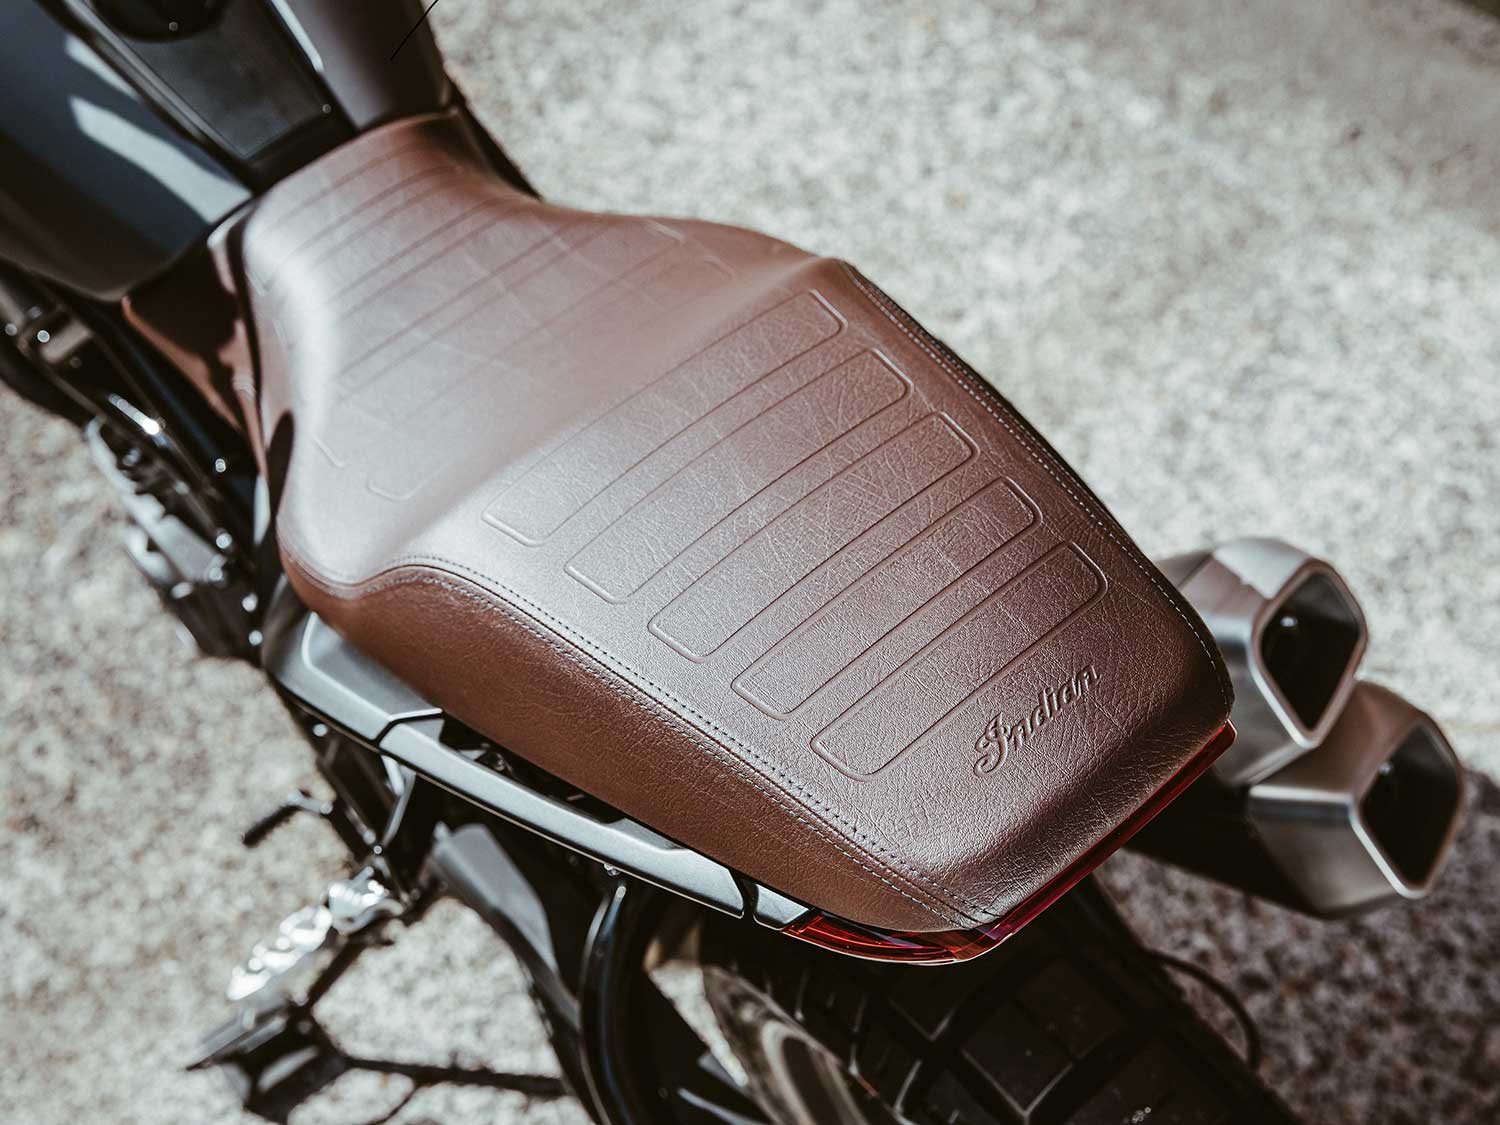 The FTR Rally’s brown aviator seat offers plenty of room for a passenger.